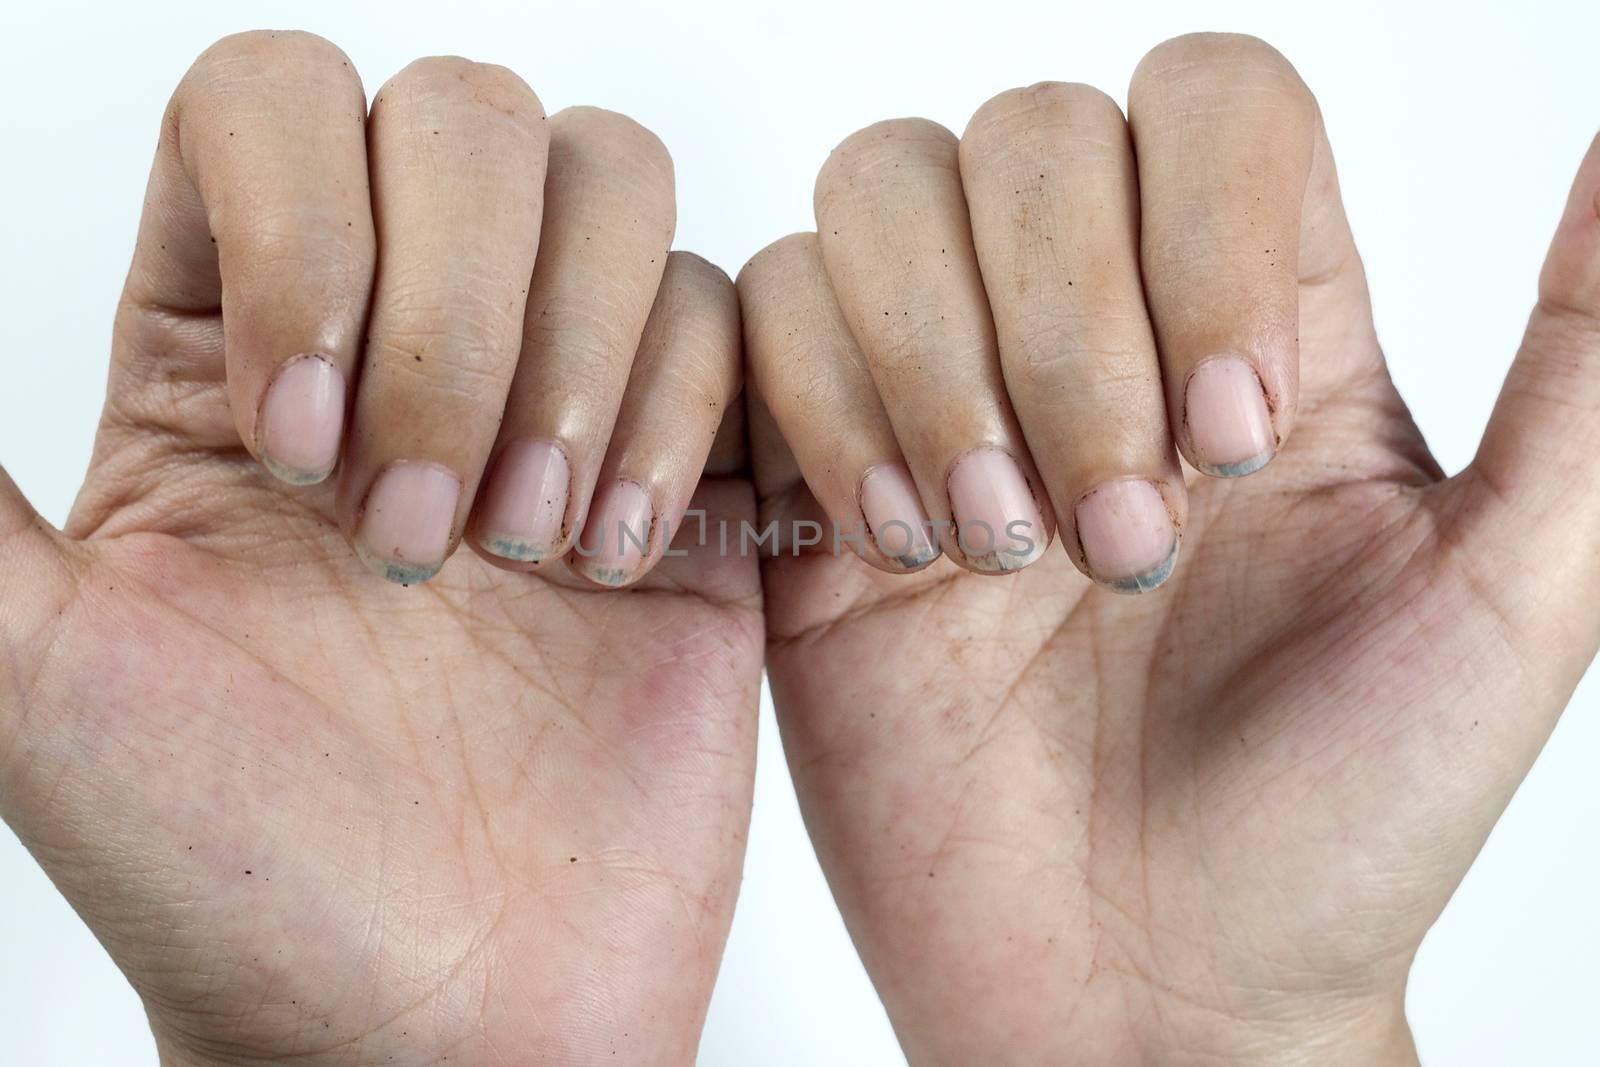 Dirty nails, dirty with dirt lodged in the nails